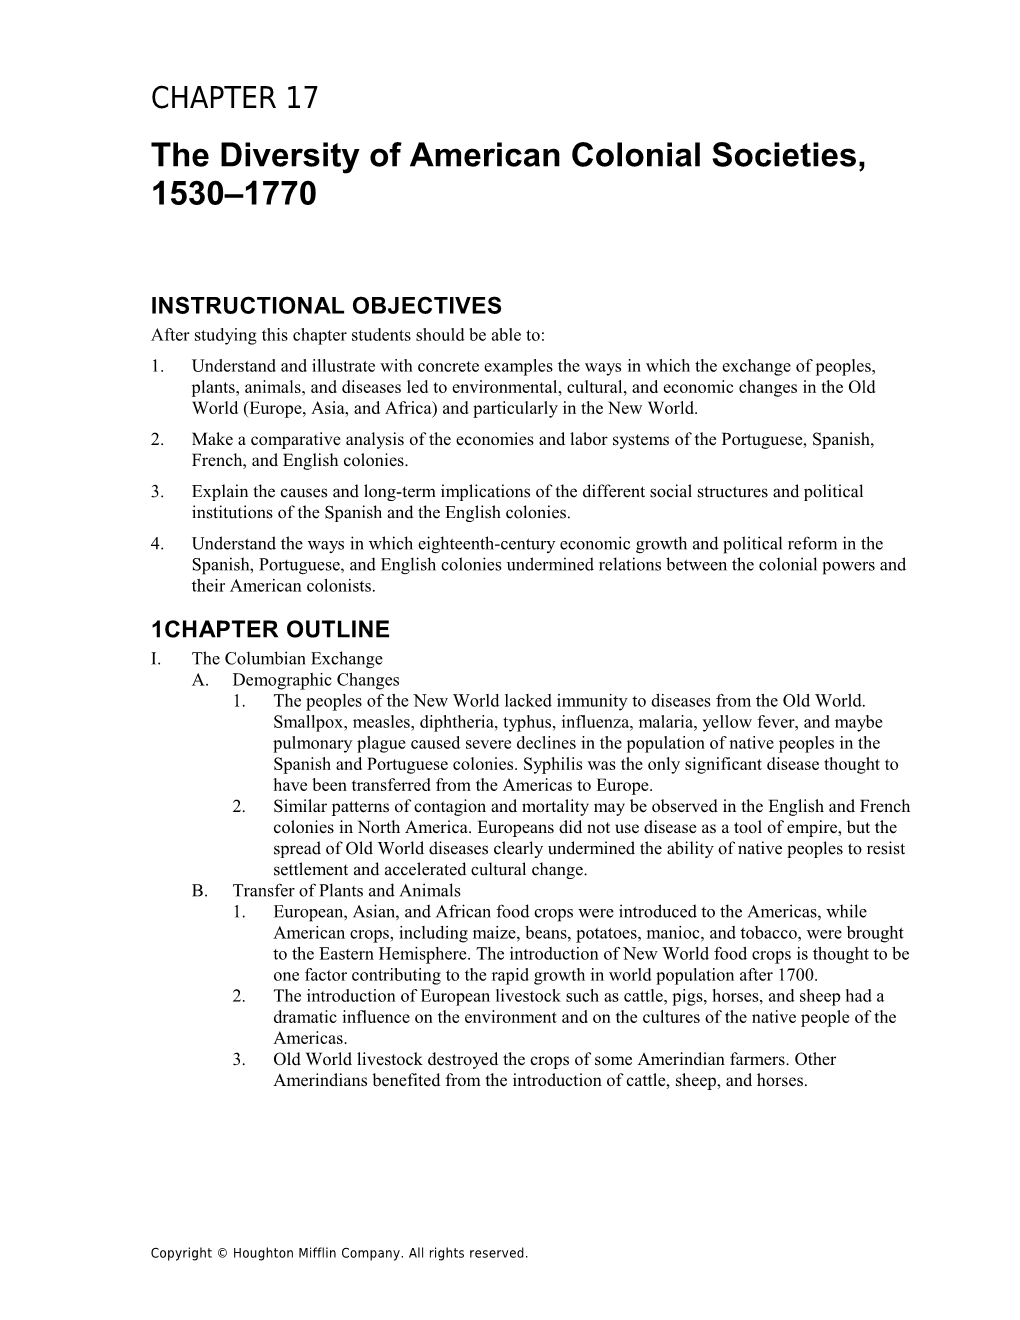 Chapter 18: the Diversity of American Colonial Societies, 1530 1770 1